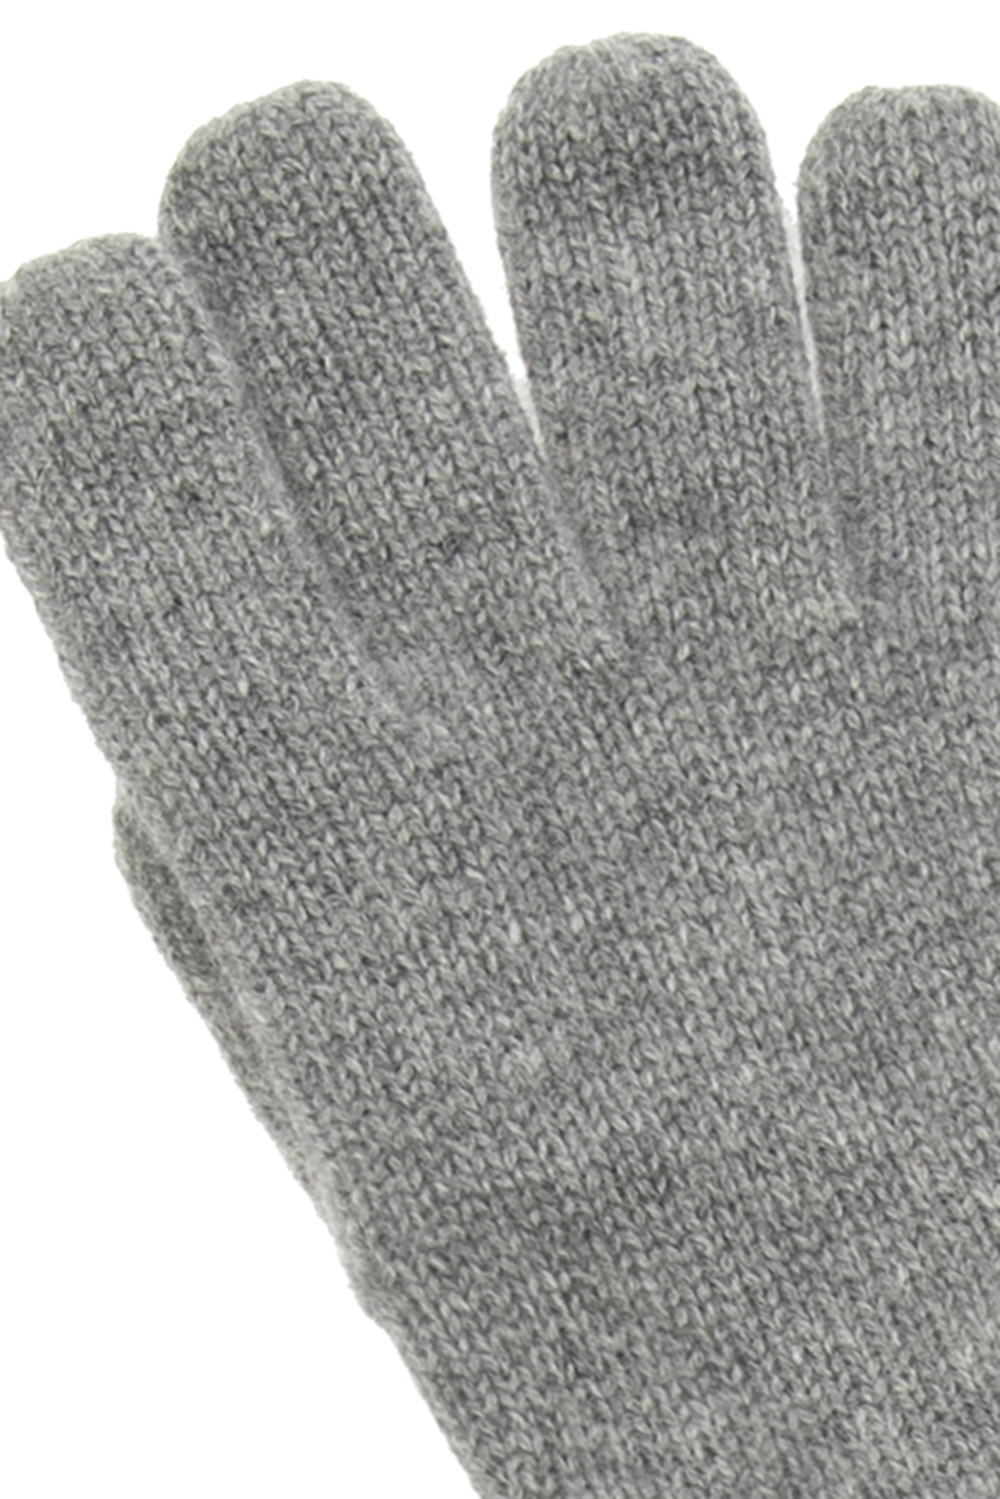 Toteme Cashmere gloves